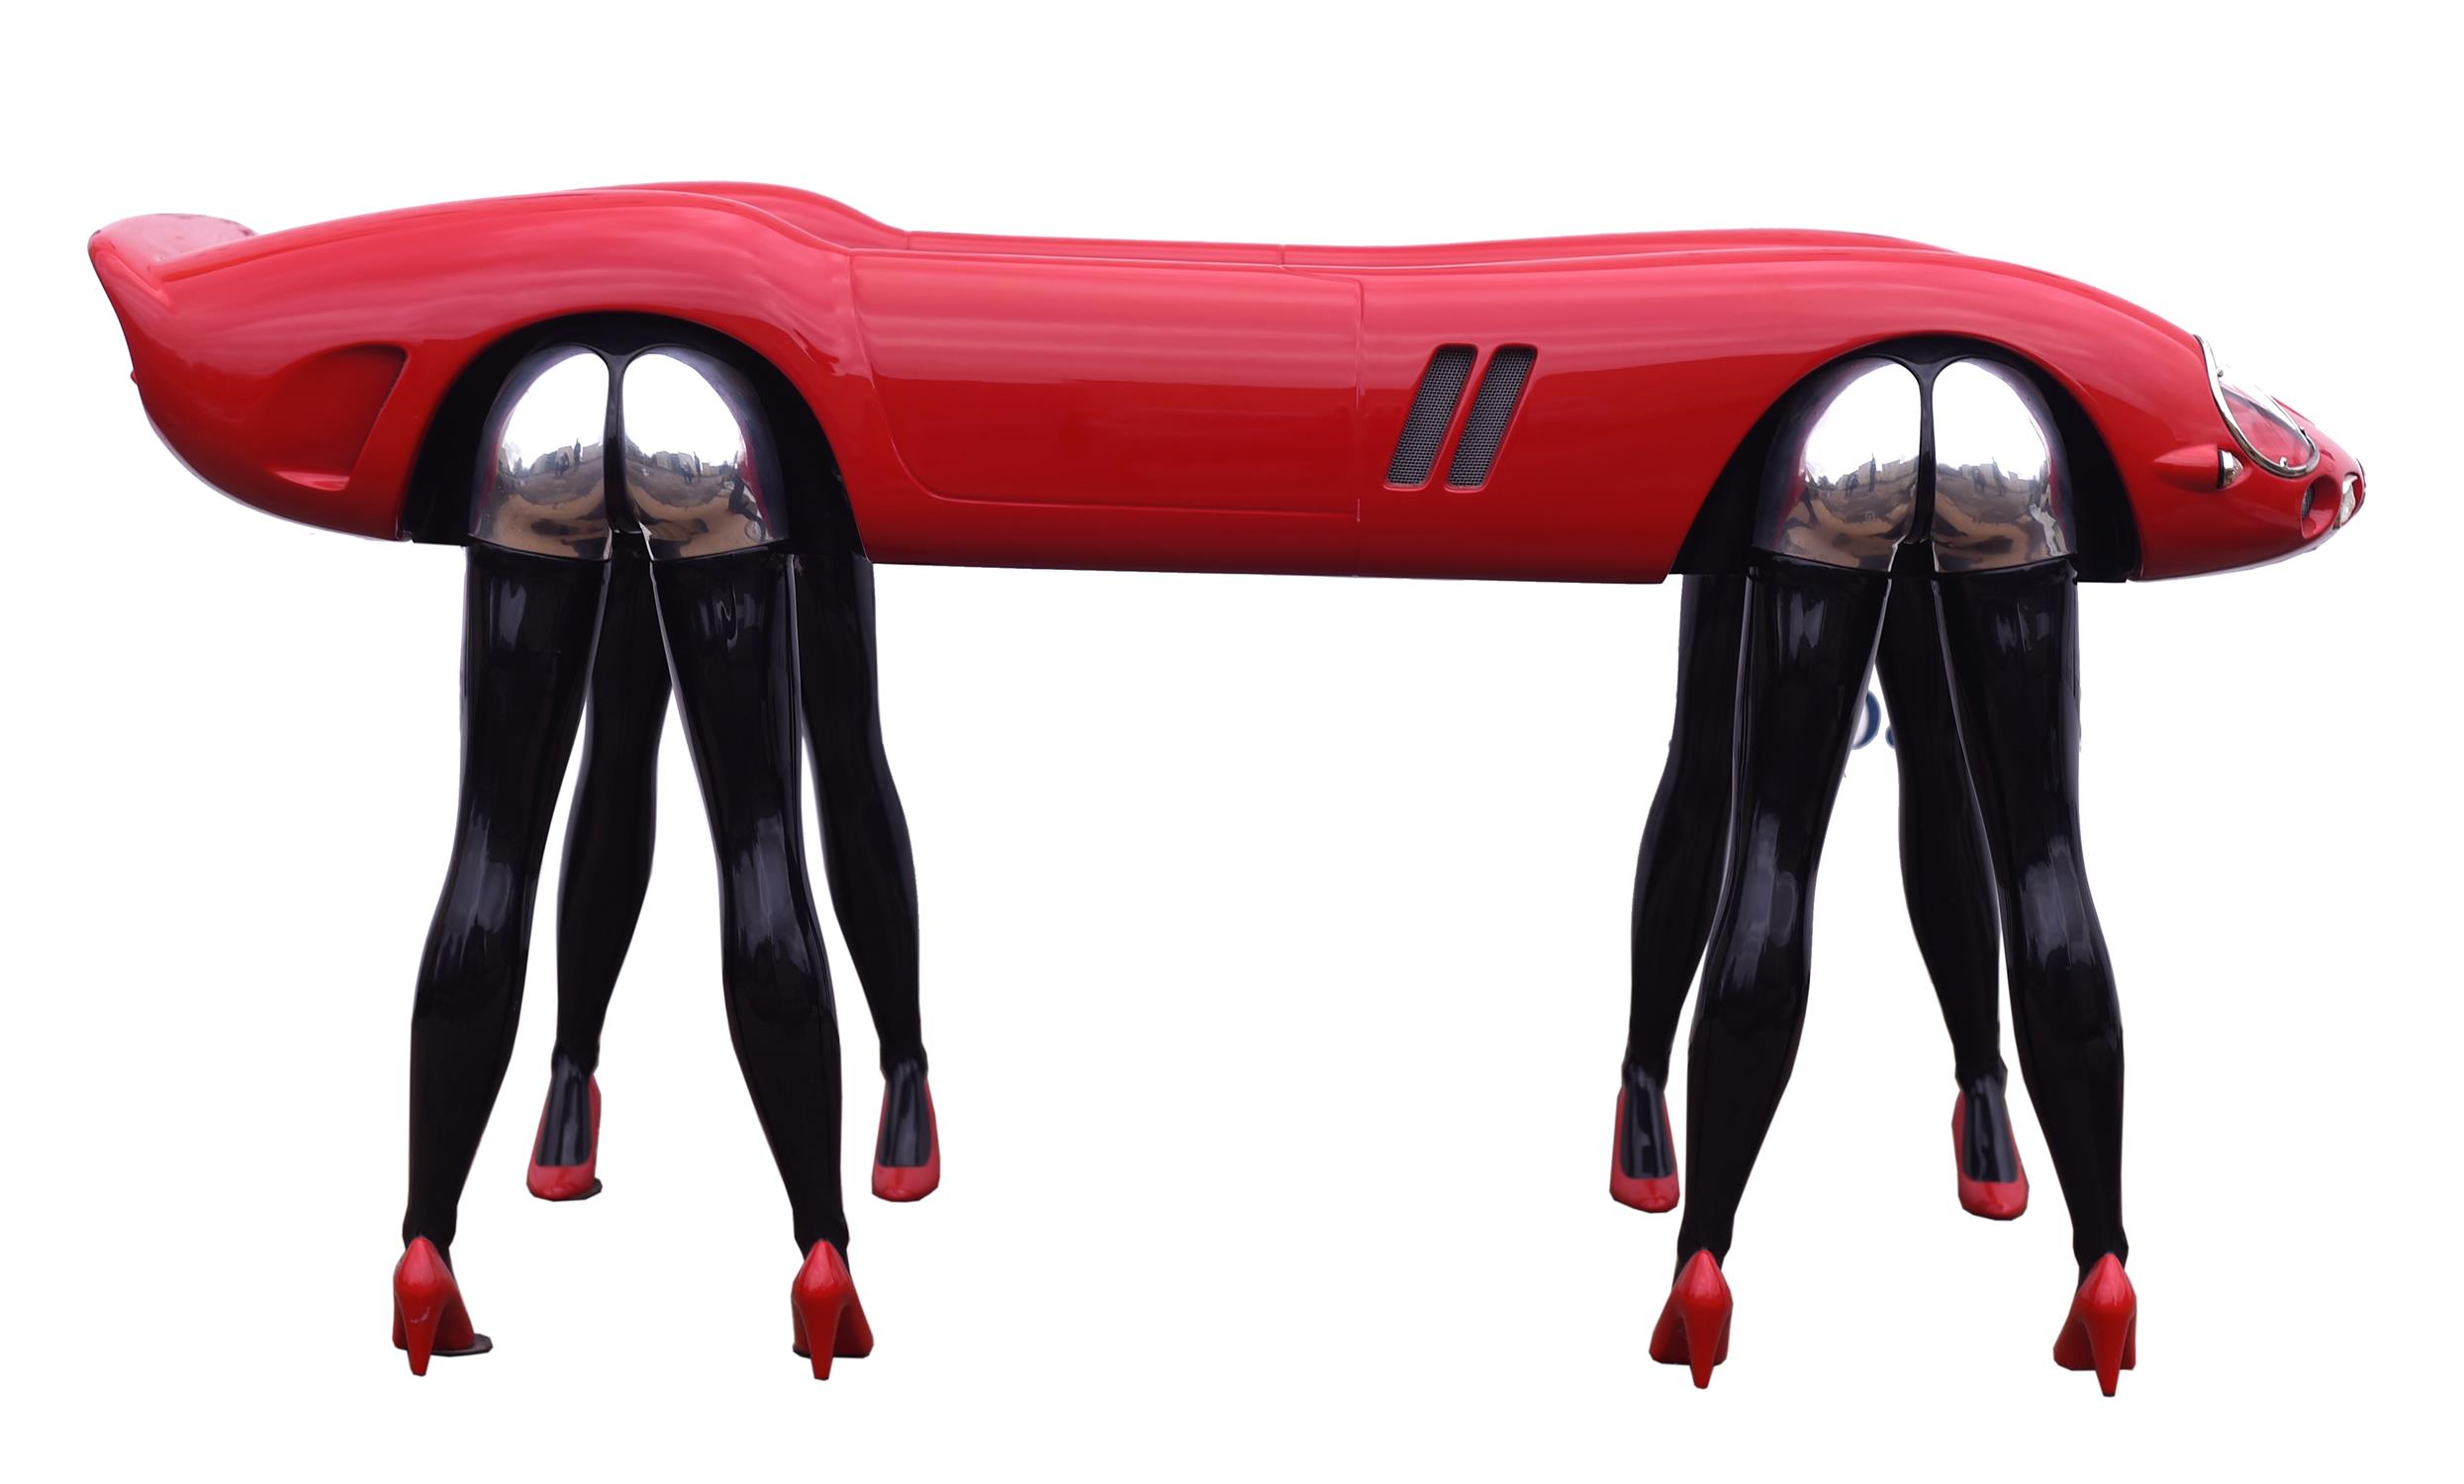 Bespoke Ferrari 250 GTO Coffee Table by Nick Butler - Titled 'P1TSTOP' With the Ferrari 250 GTO - Image 7 of 19